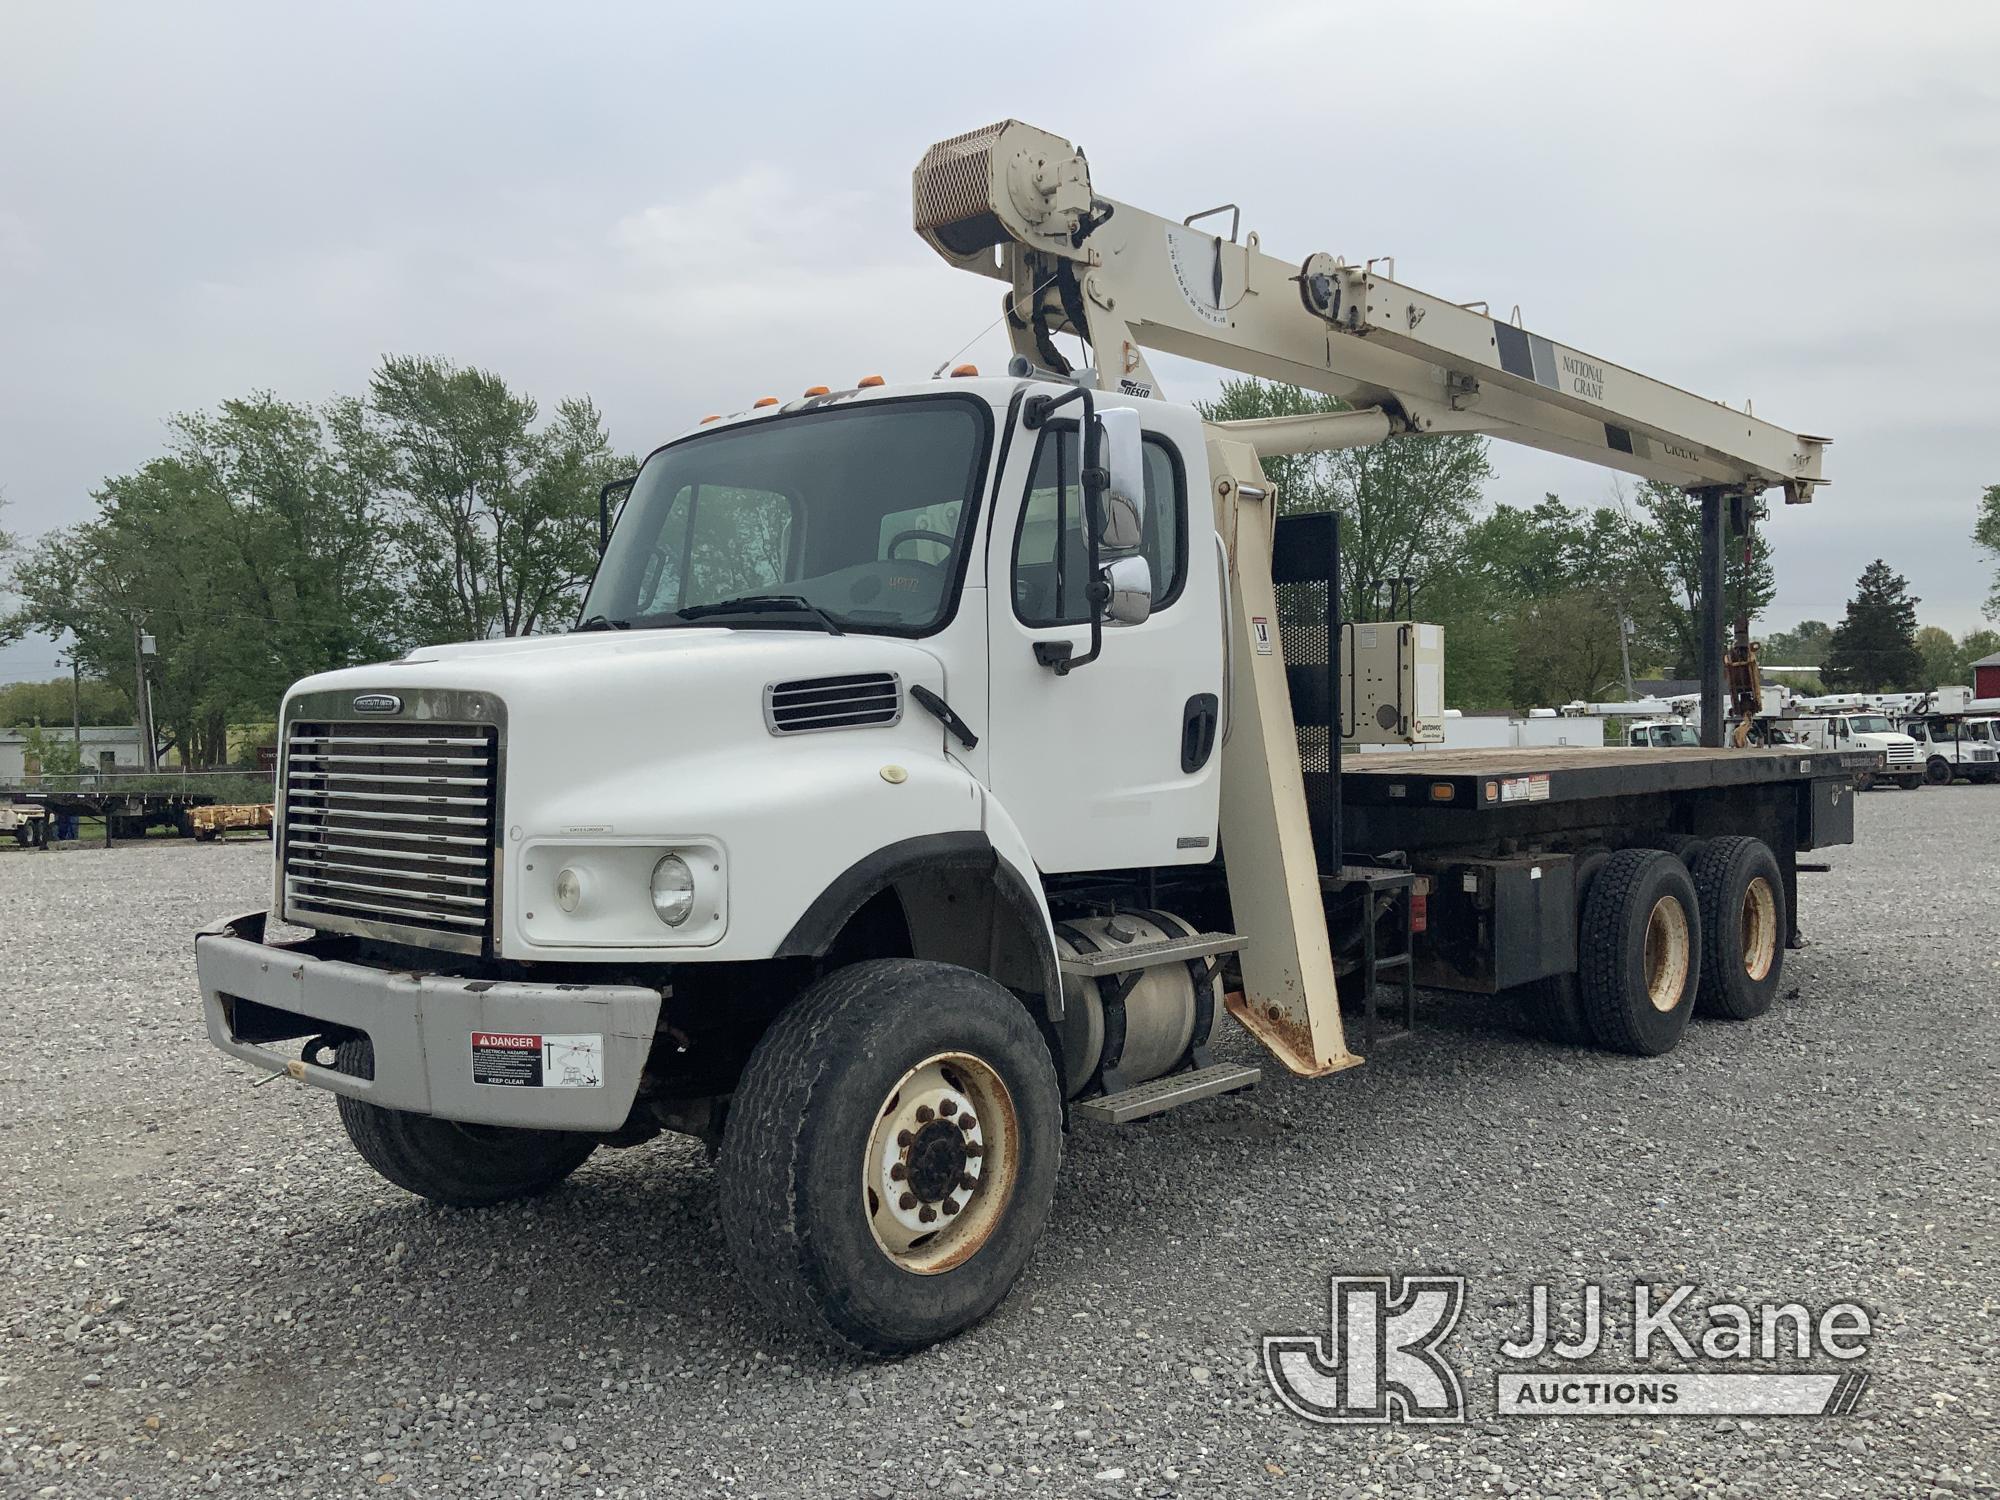 (Hawk Point, MO) National 500E2 Series 571E2, Hydraulic Crane mounted behind cab on 2007 Freightline